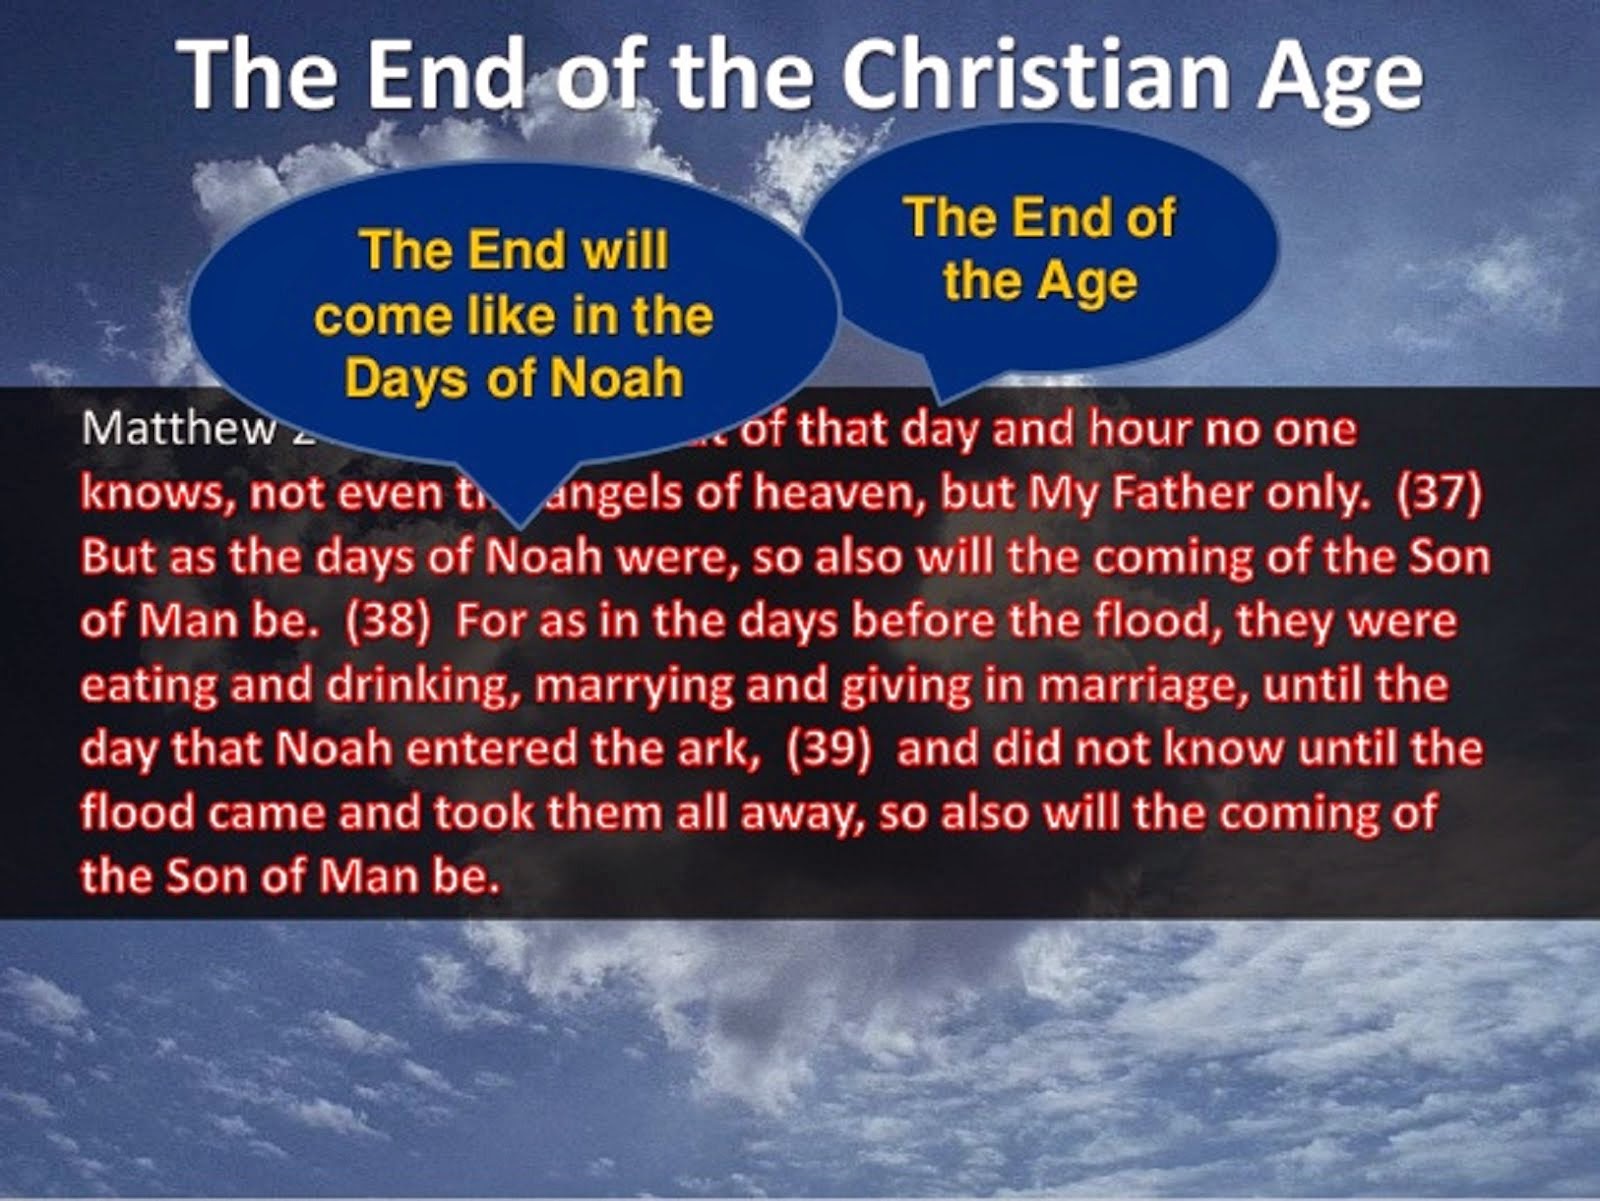 THE END OF THE CHRISTIAN AGE